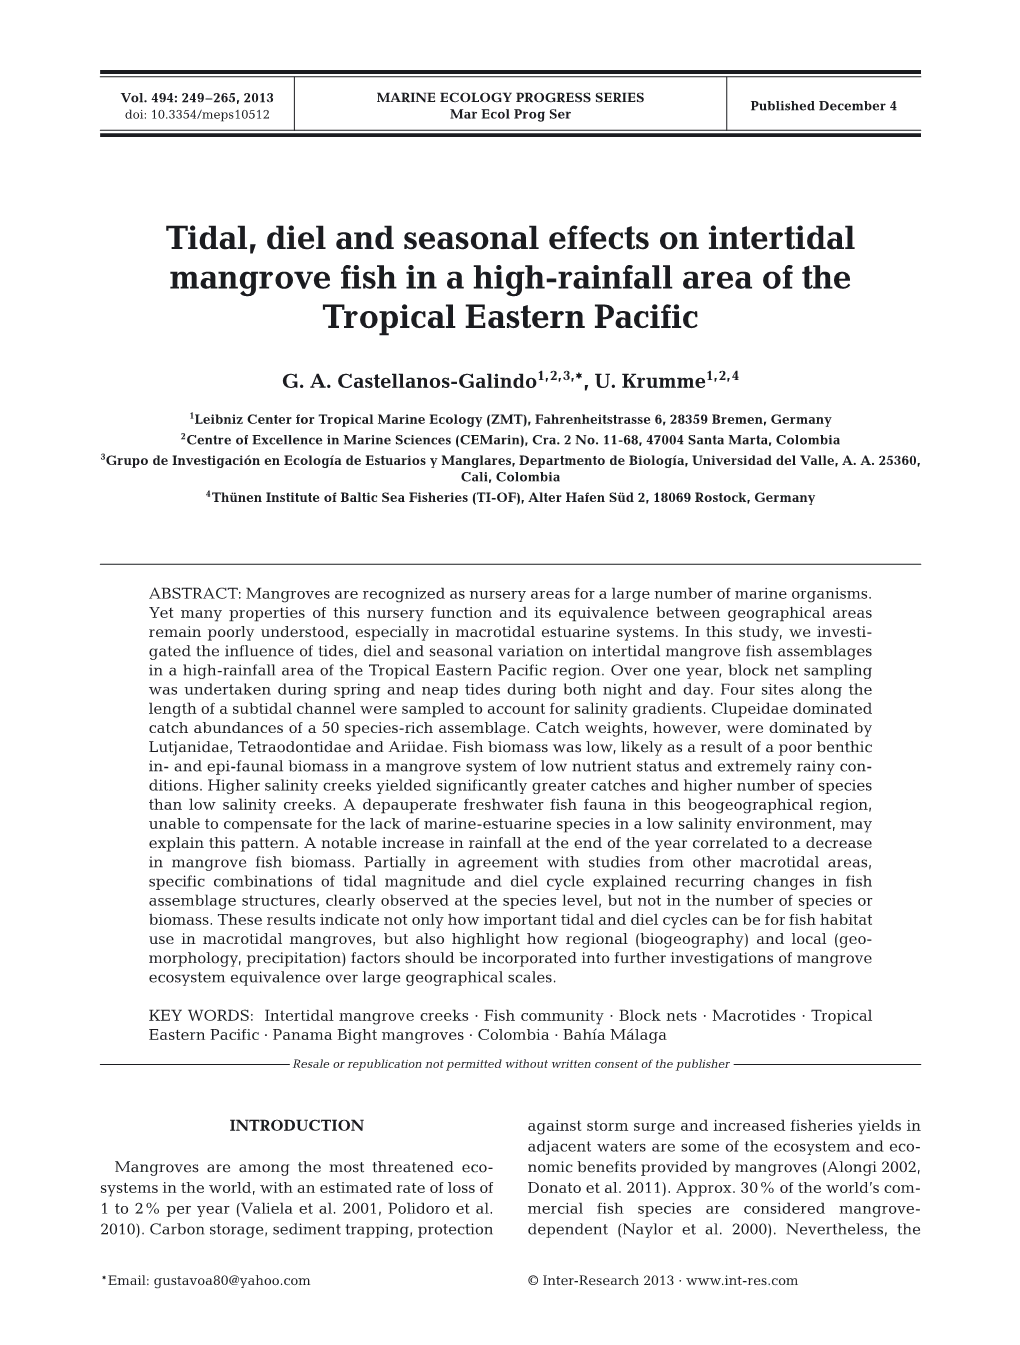 Tidal, Diel and Seasonal Effects on Intertidal Mangrove Fish in a High-Rainfall Area of the Tropical Eastern Pacific